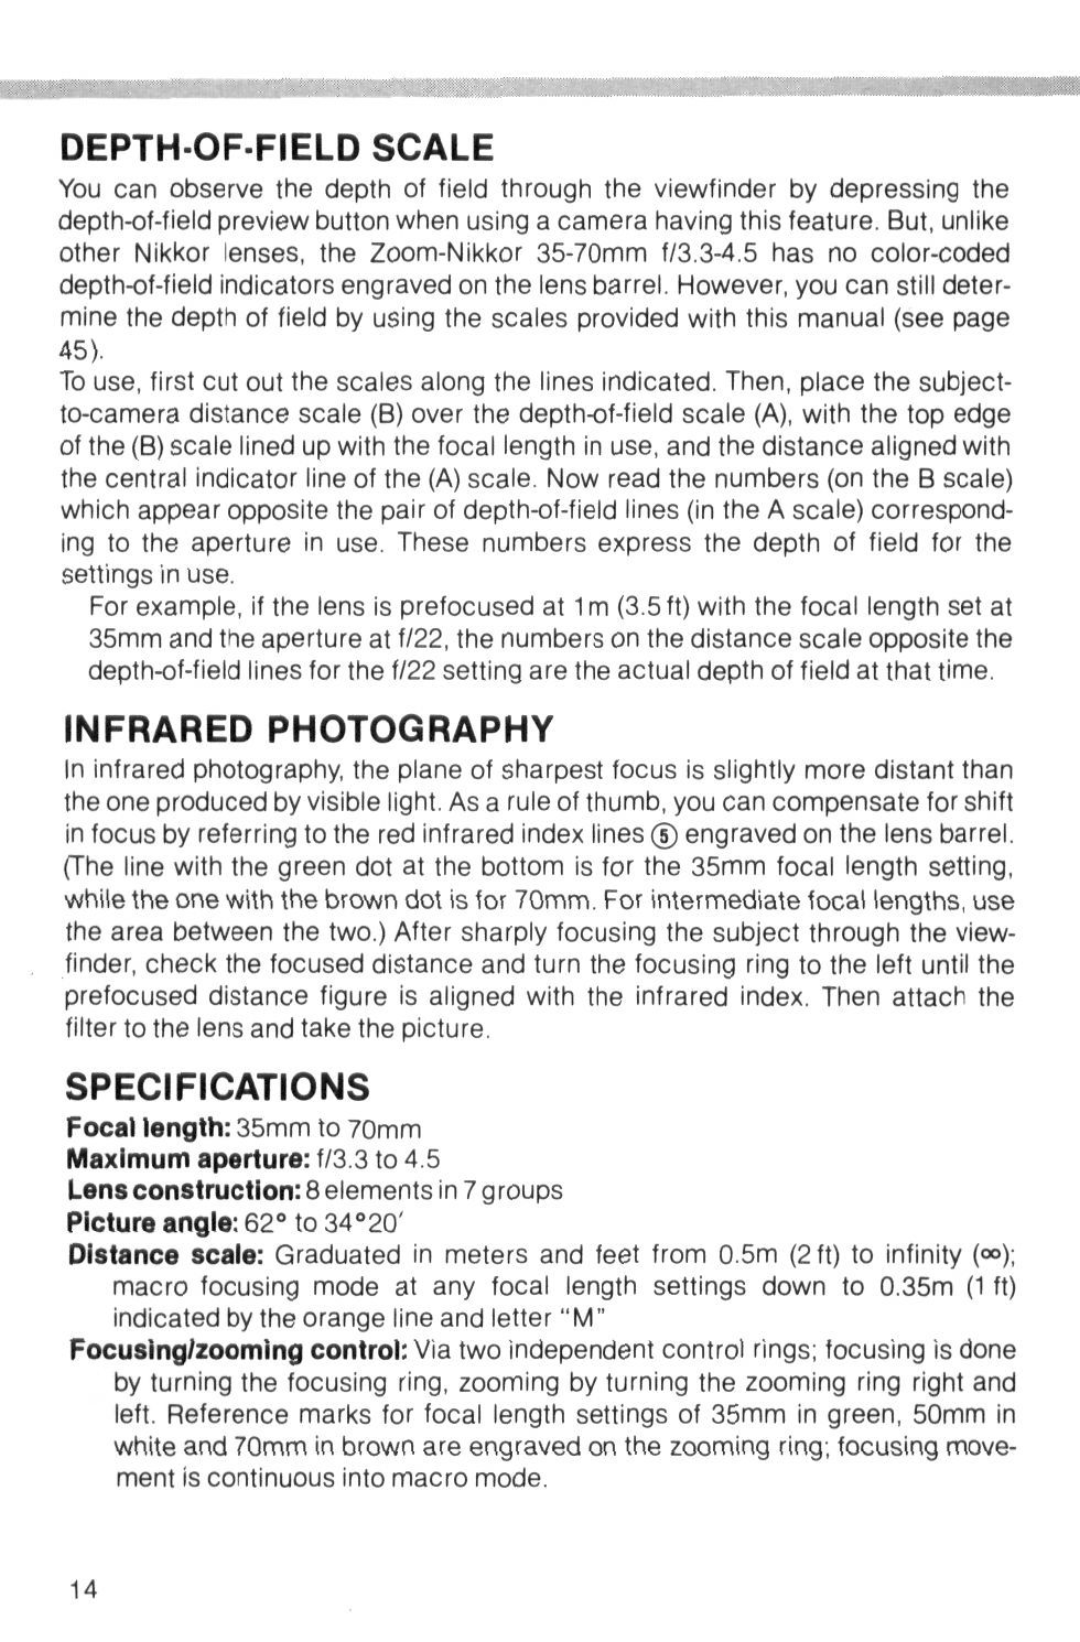 Nikon Depth-Of-Field Scale, Infrared Photography, Specifications, Focal length 35mm to 70mm Maximum aperture f/3.3 to 